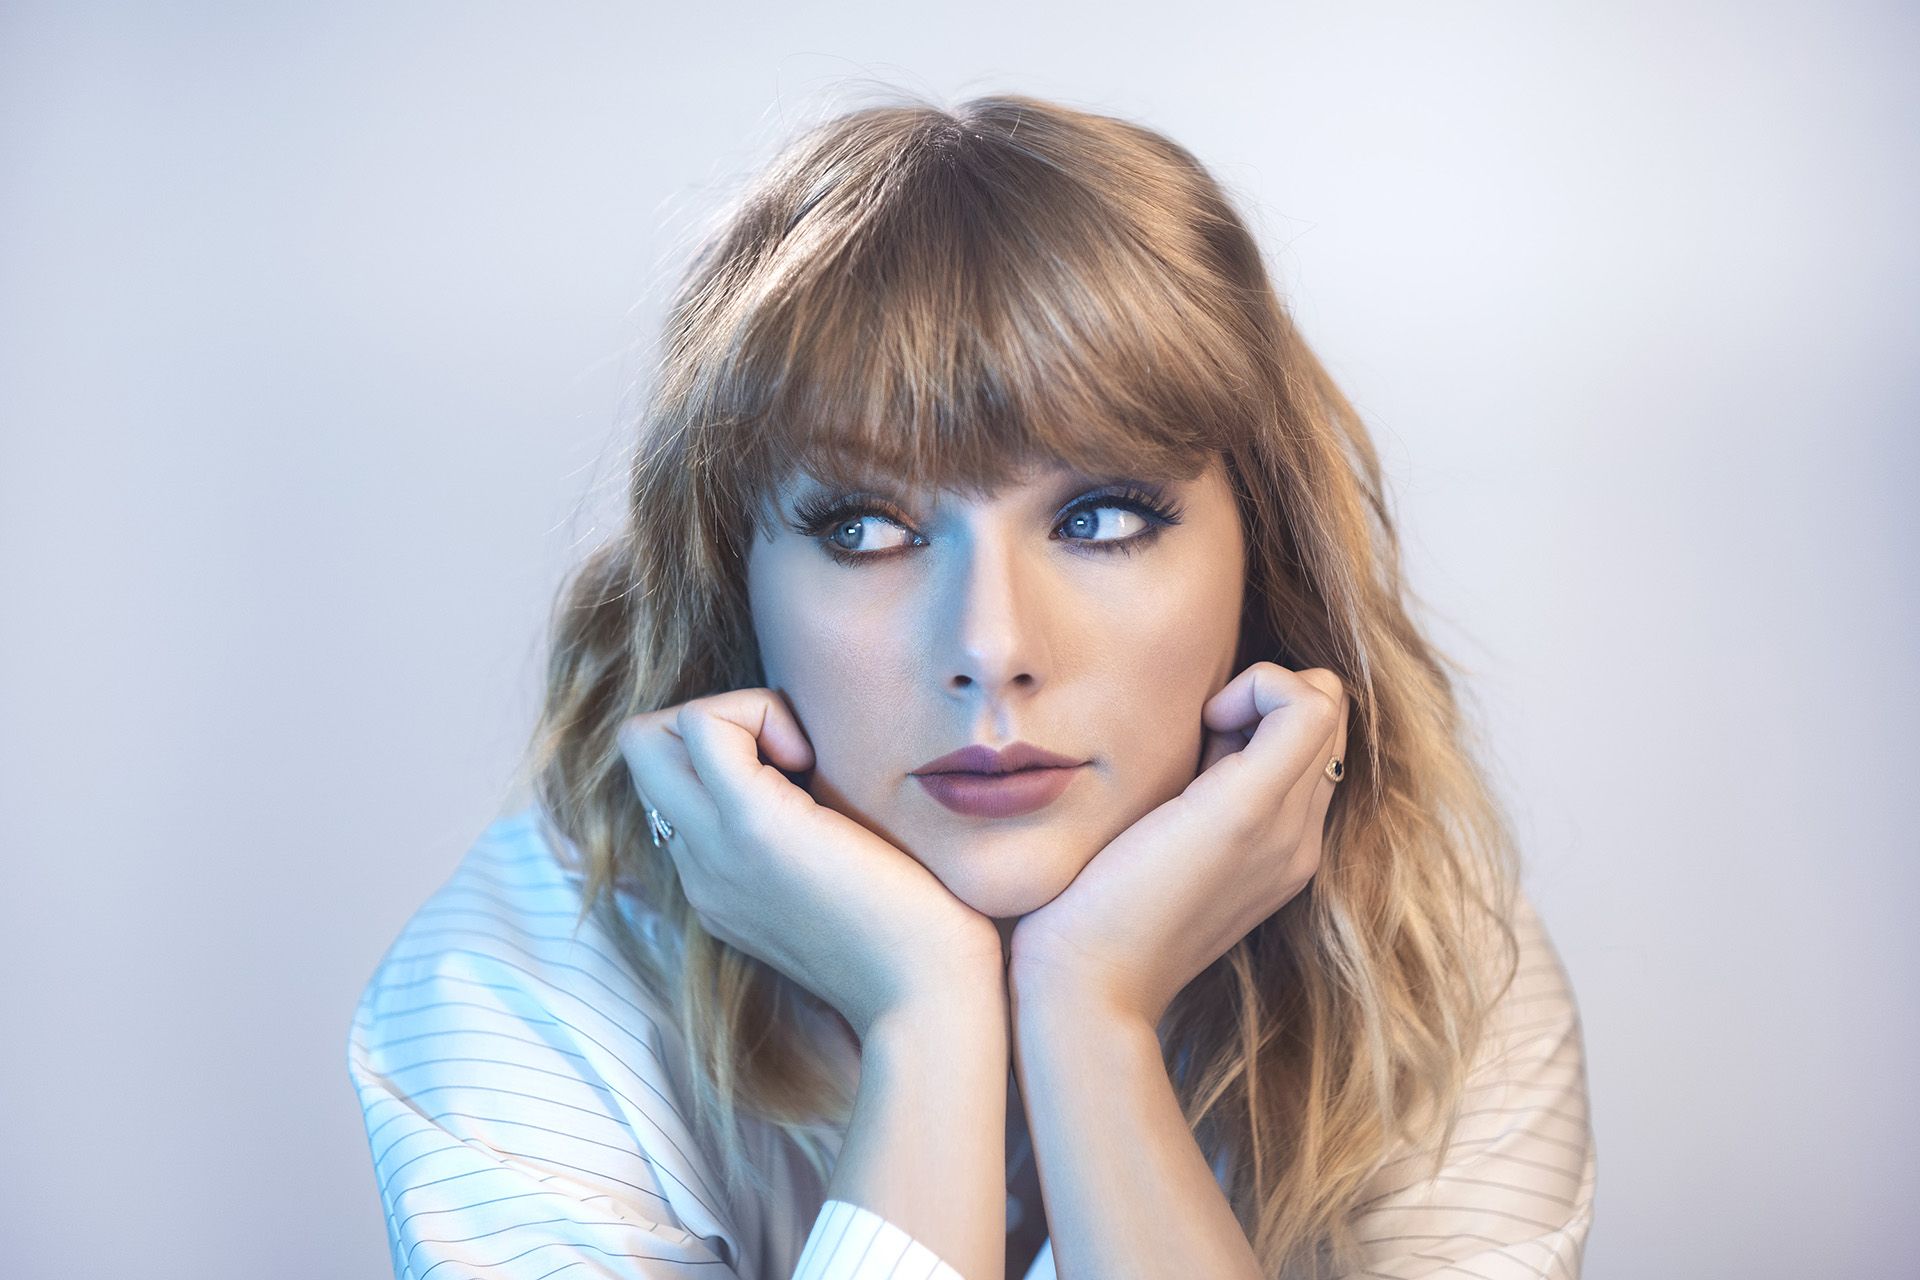 Taylor Swift releases live versions of songs from the 'Lover